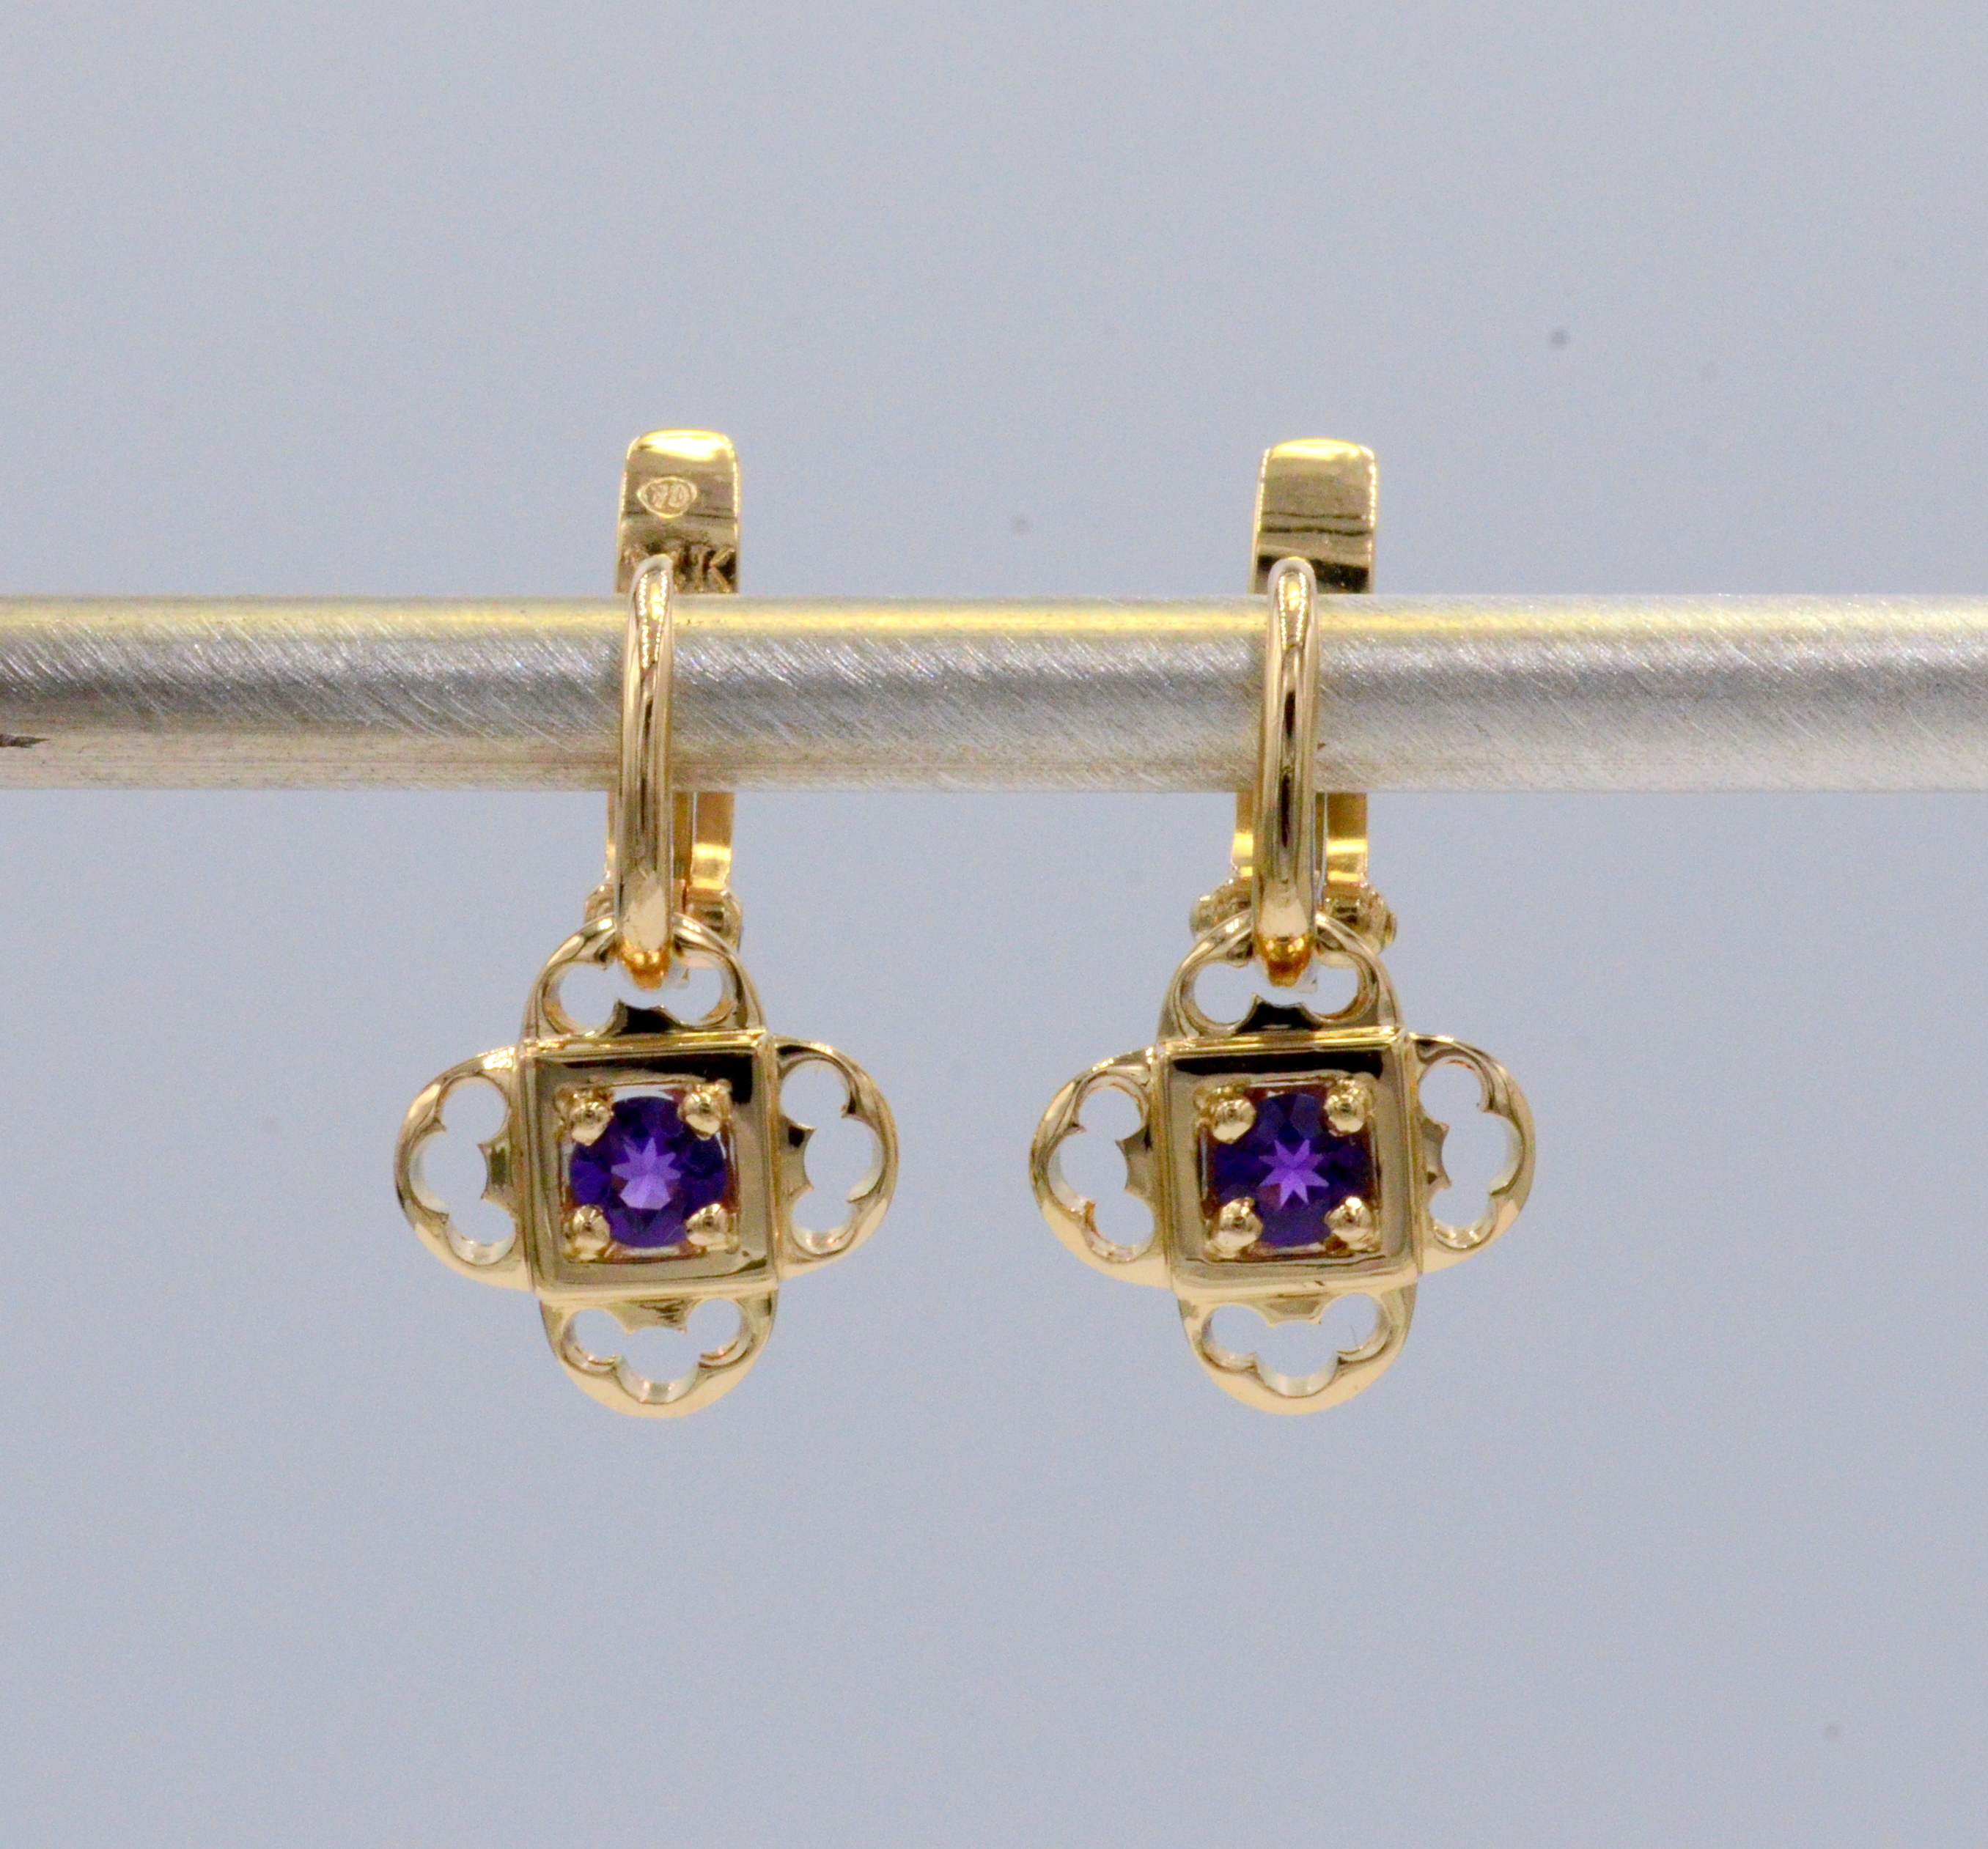 Contemporary Clover Leaf design, Amethyst gemstone Euro Charm. Euro Charm Earrings to be worn with our signature Euro Wires. Go to "About Store" for more information in regard to our Euro Wires.